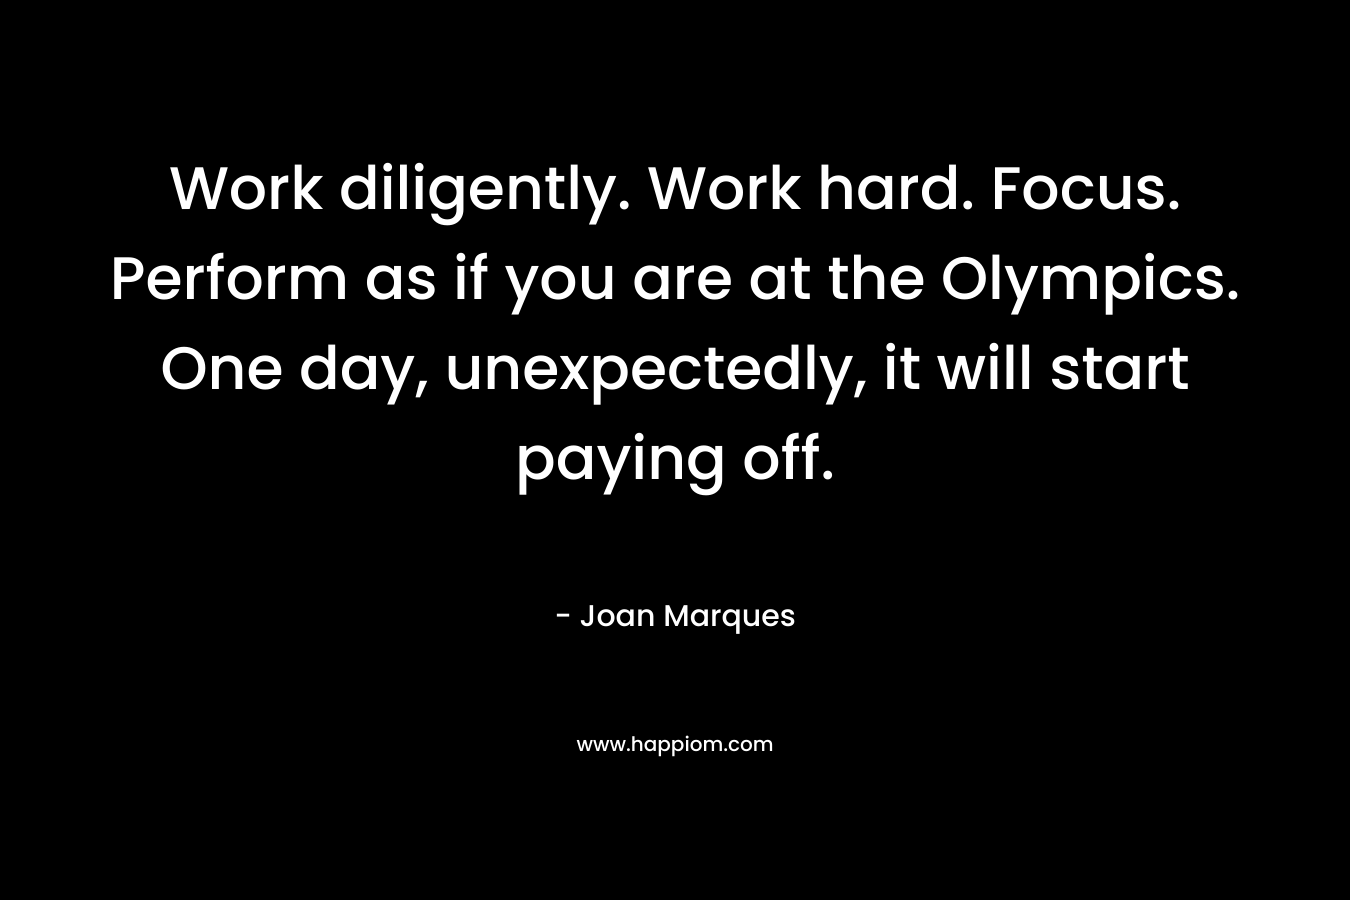 Work diligently. Work hard. Focus. Perform as if you are at the Olympics. One day, unexpectedly, it will start paying off. – Joan Marques